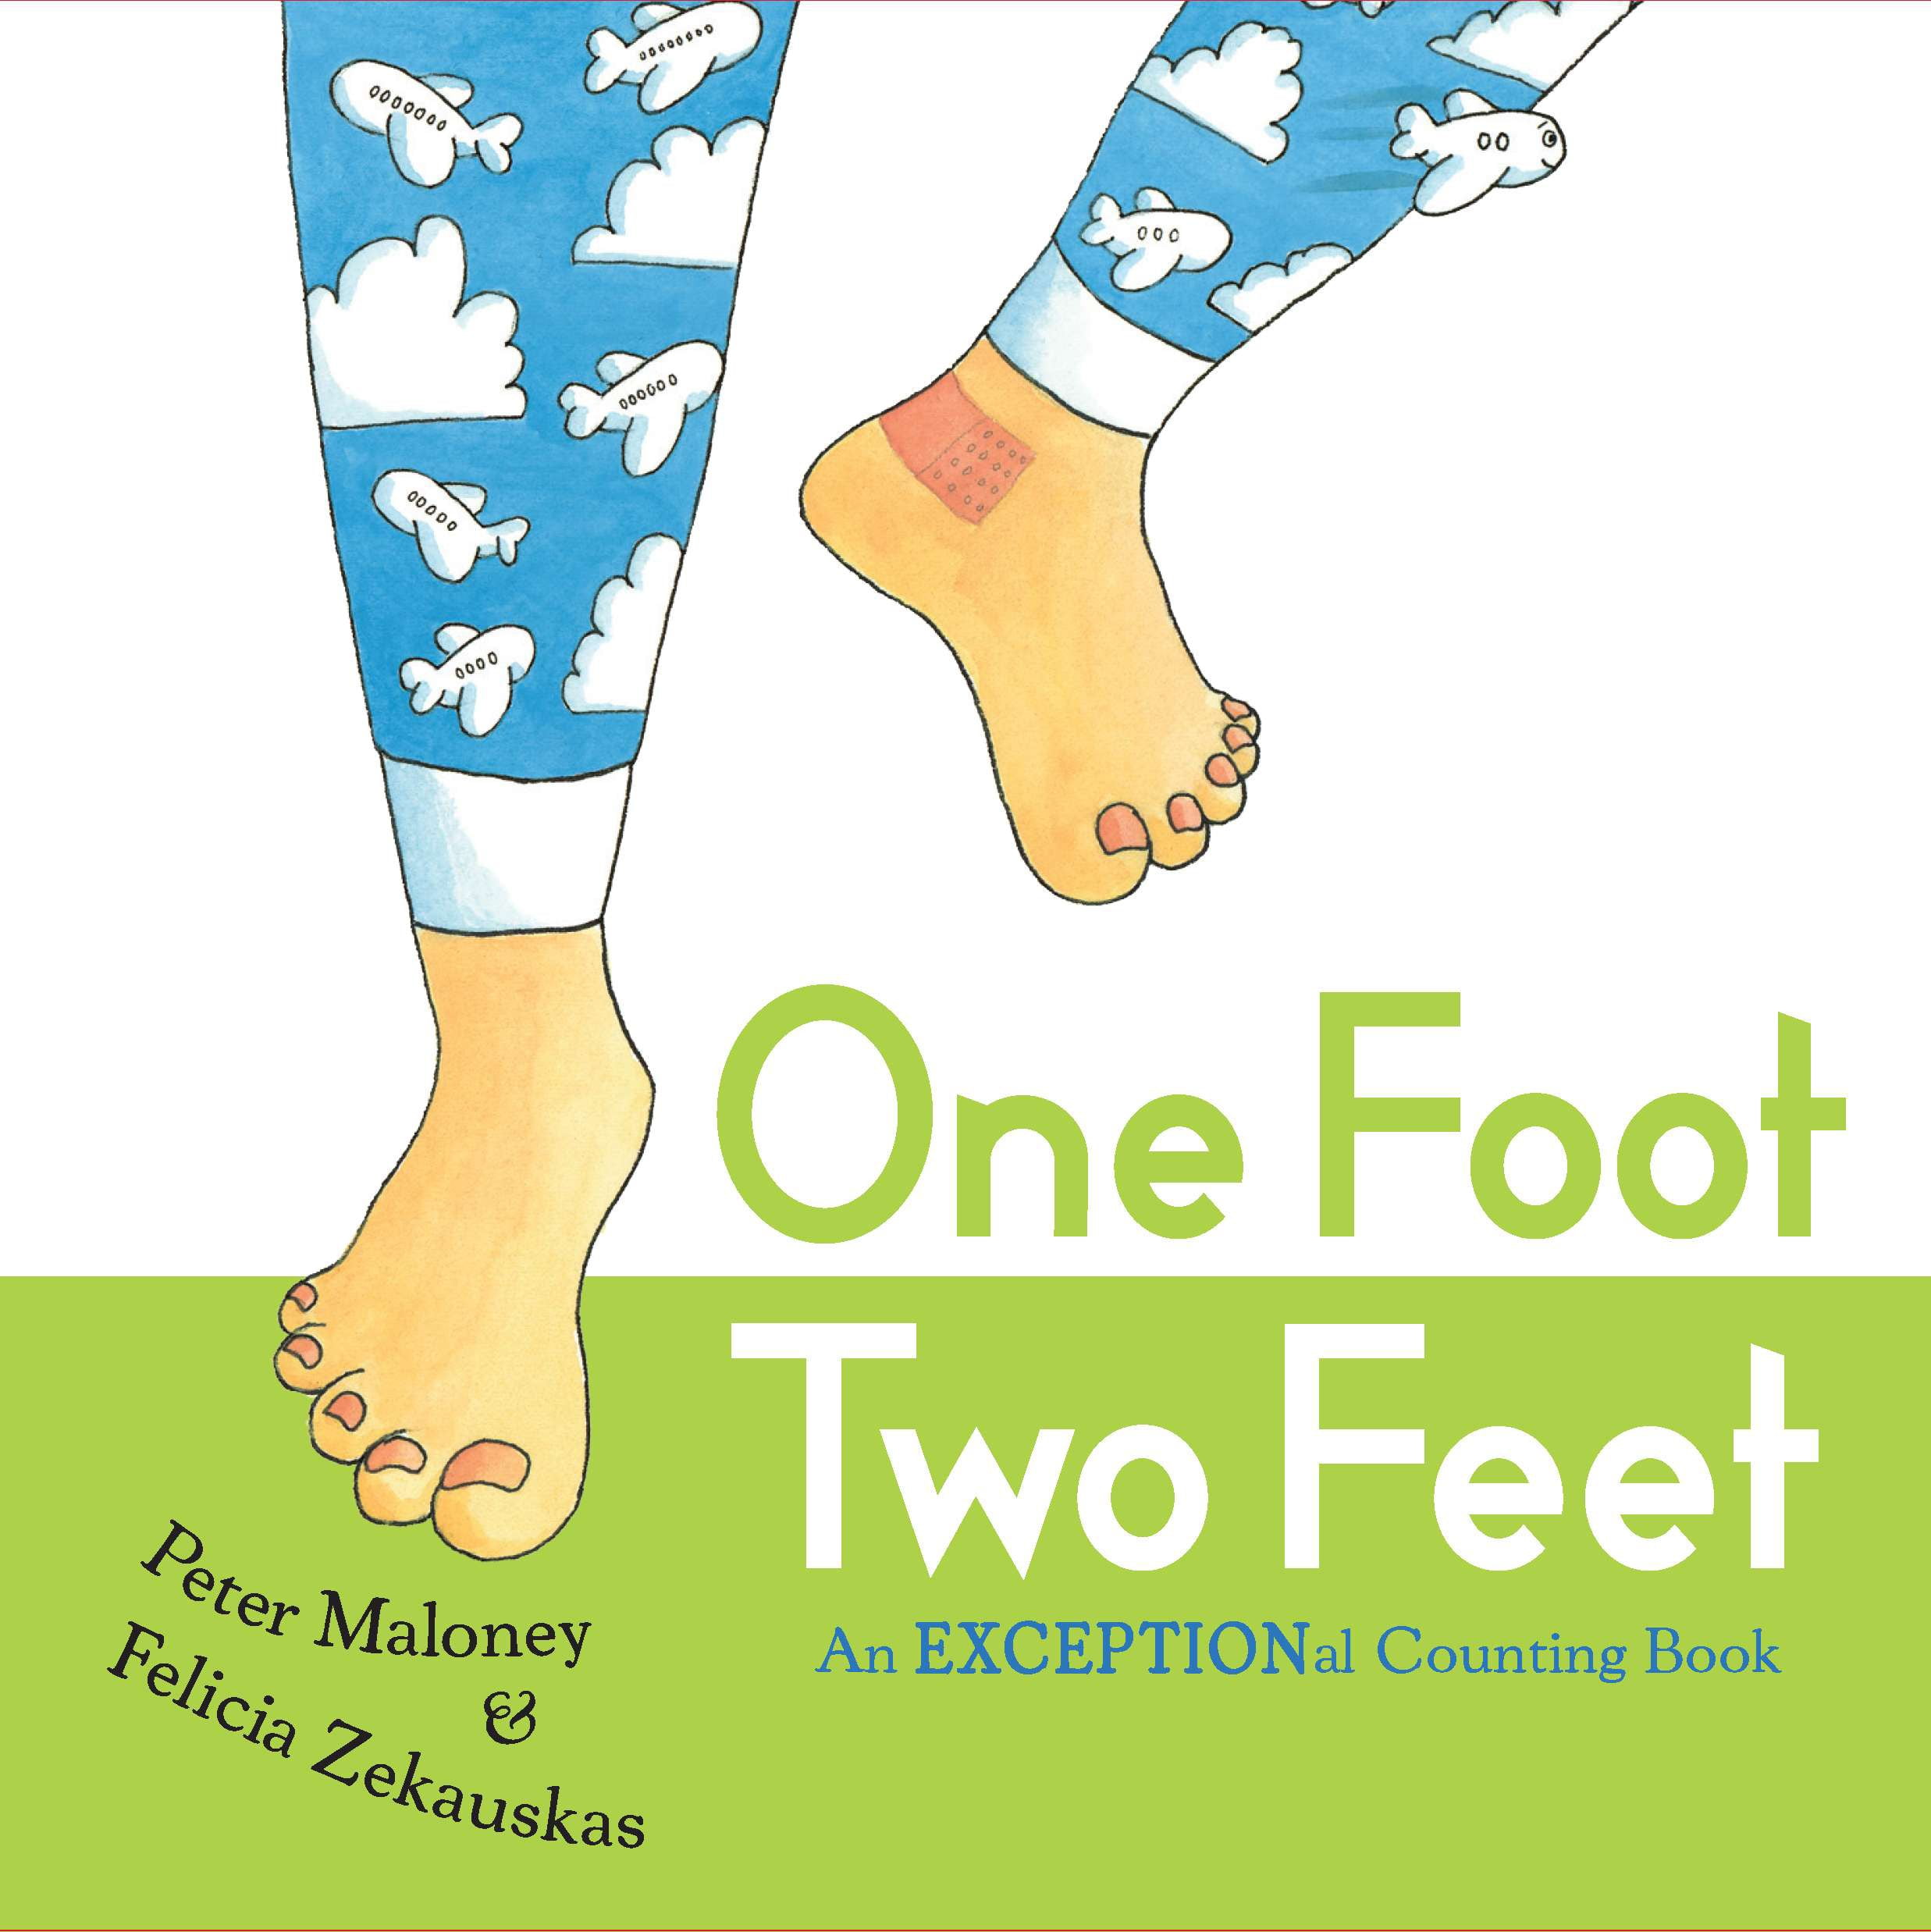 One Foot, Two Feet An EXCEPTIONal Counting Book